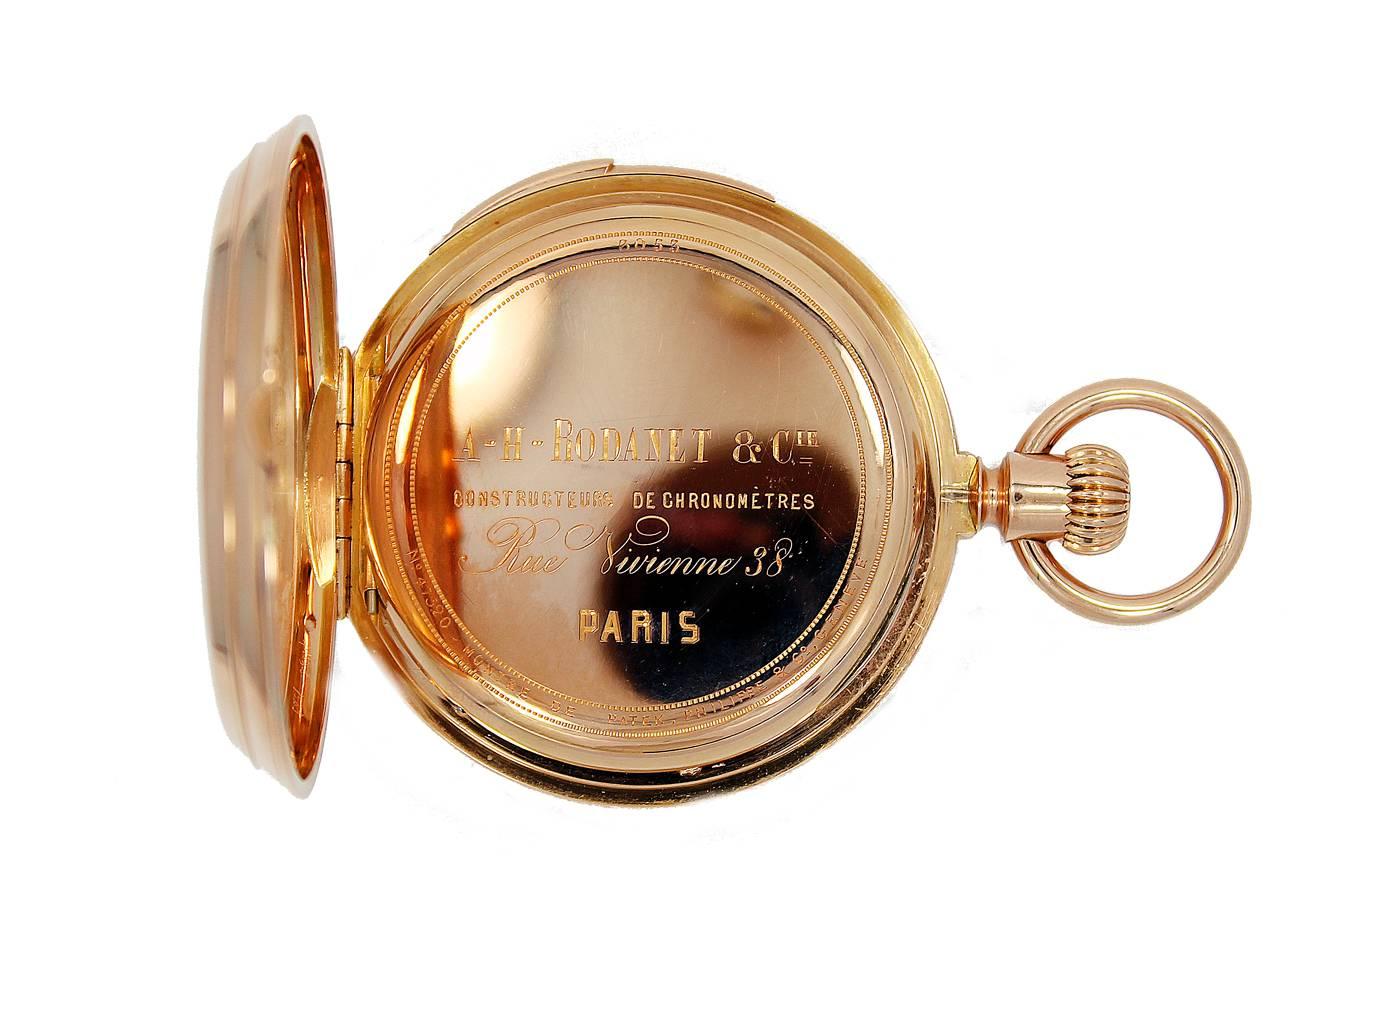 18K Yellow Gold Patek Philippe Pocket Watch. This incredible watch was manufactured in 1873 and sold on January 28th 1875. The watch is movement number 47.520, Calibre 19''', 5-minute repeater, lever escape. It is in pristine condition and working